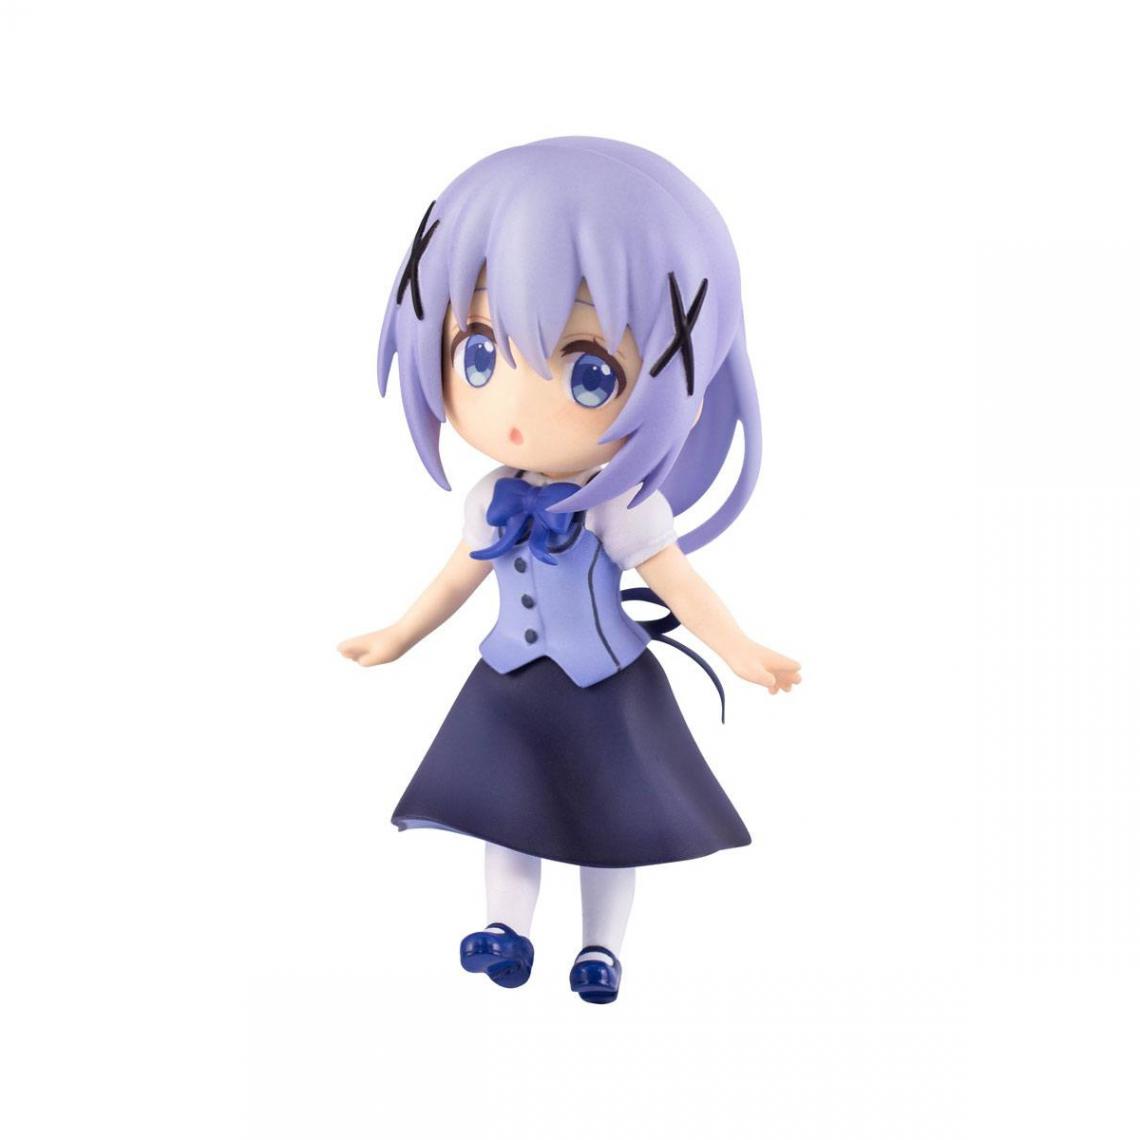 Plum - Is the Order a Rabbit - Statuette Bloom Chino 6 cm - Mangas